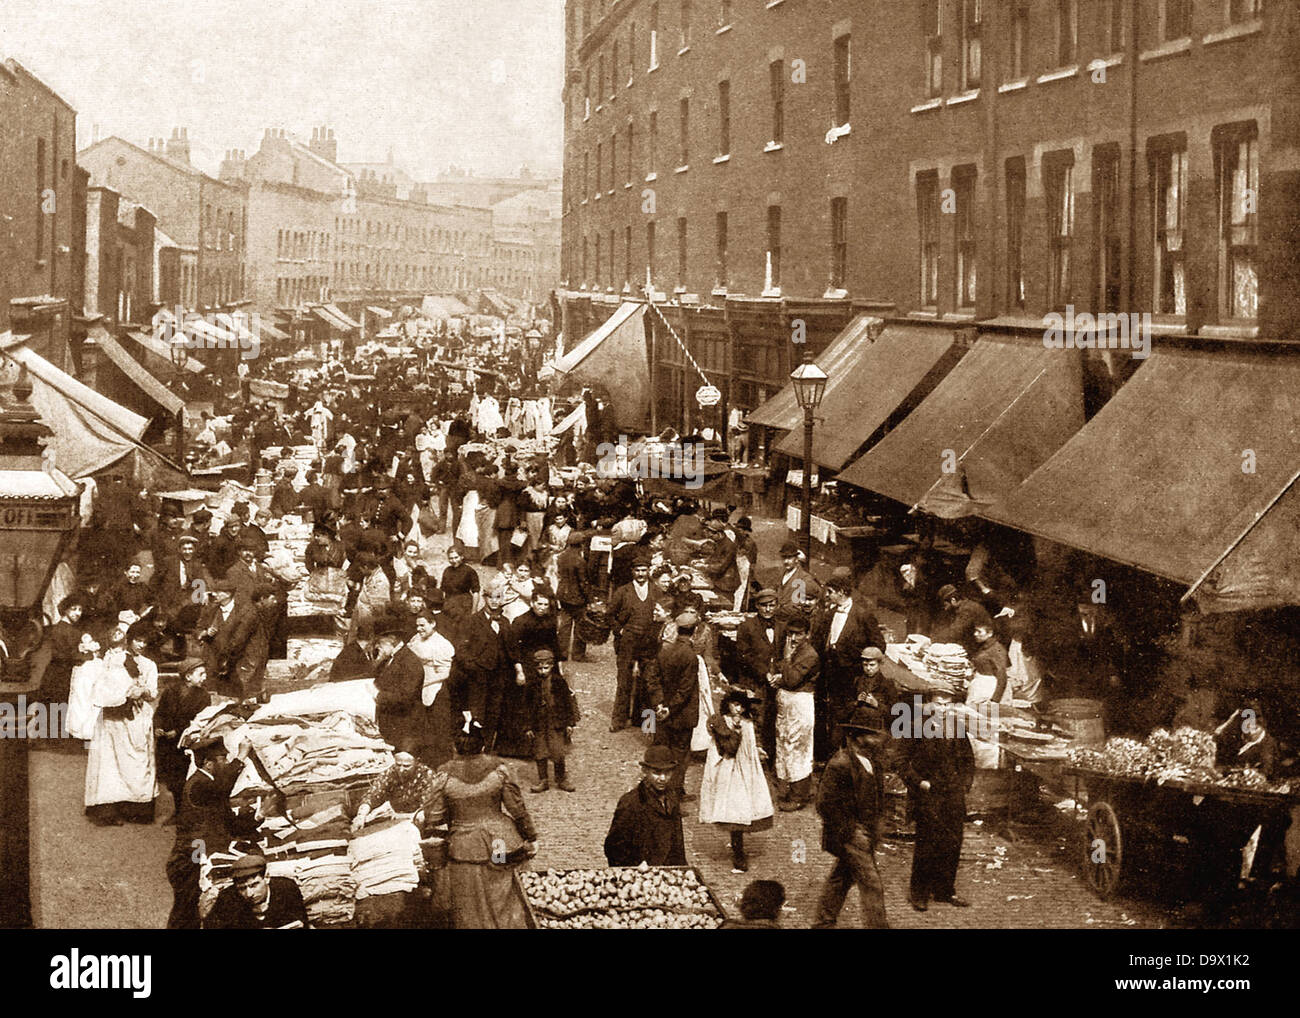 LONDON Petticoat Lane Middlesex St early PPC 